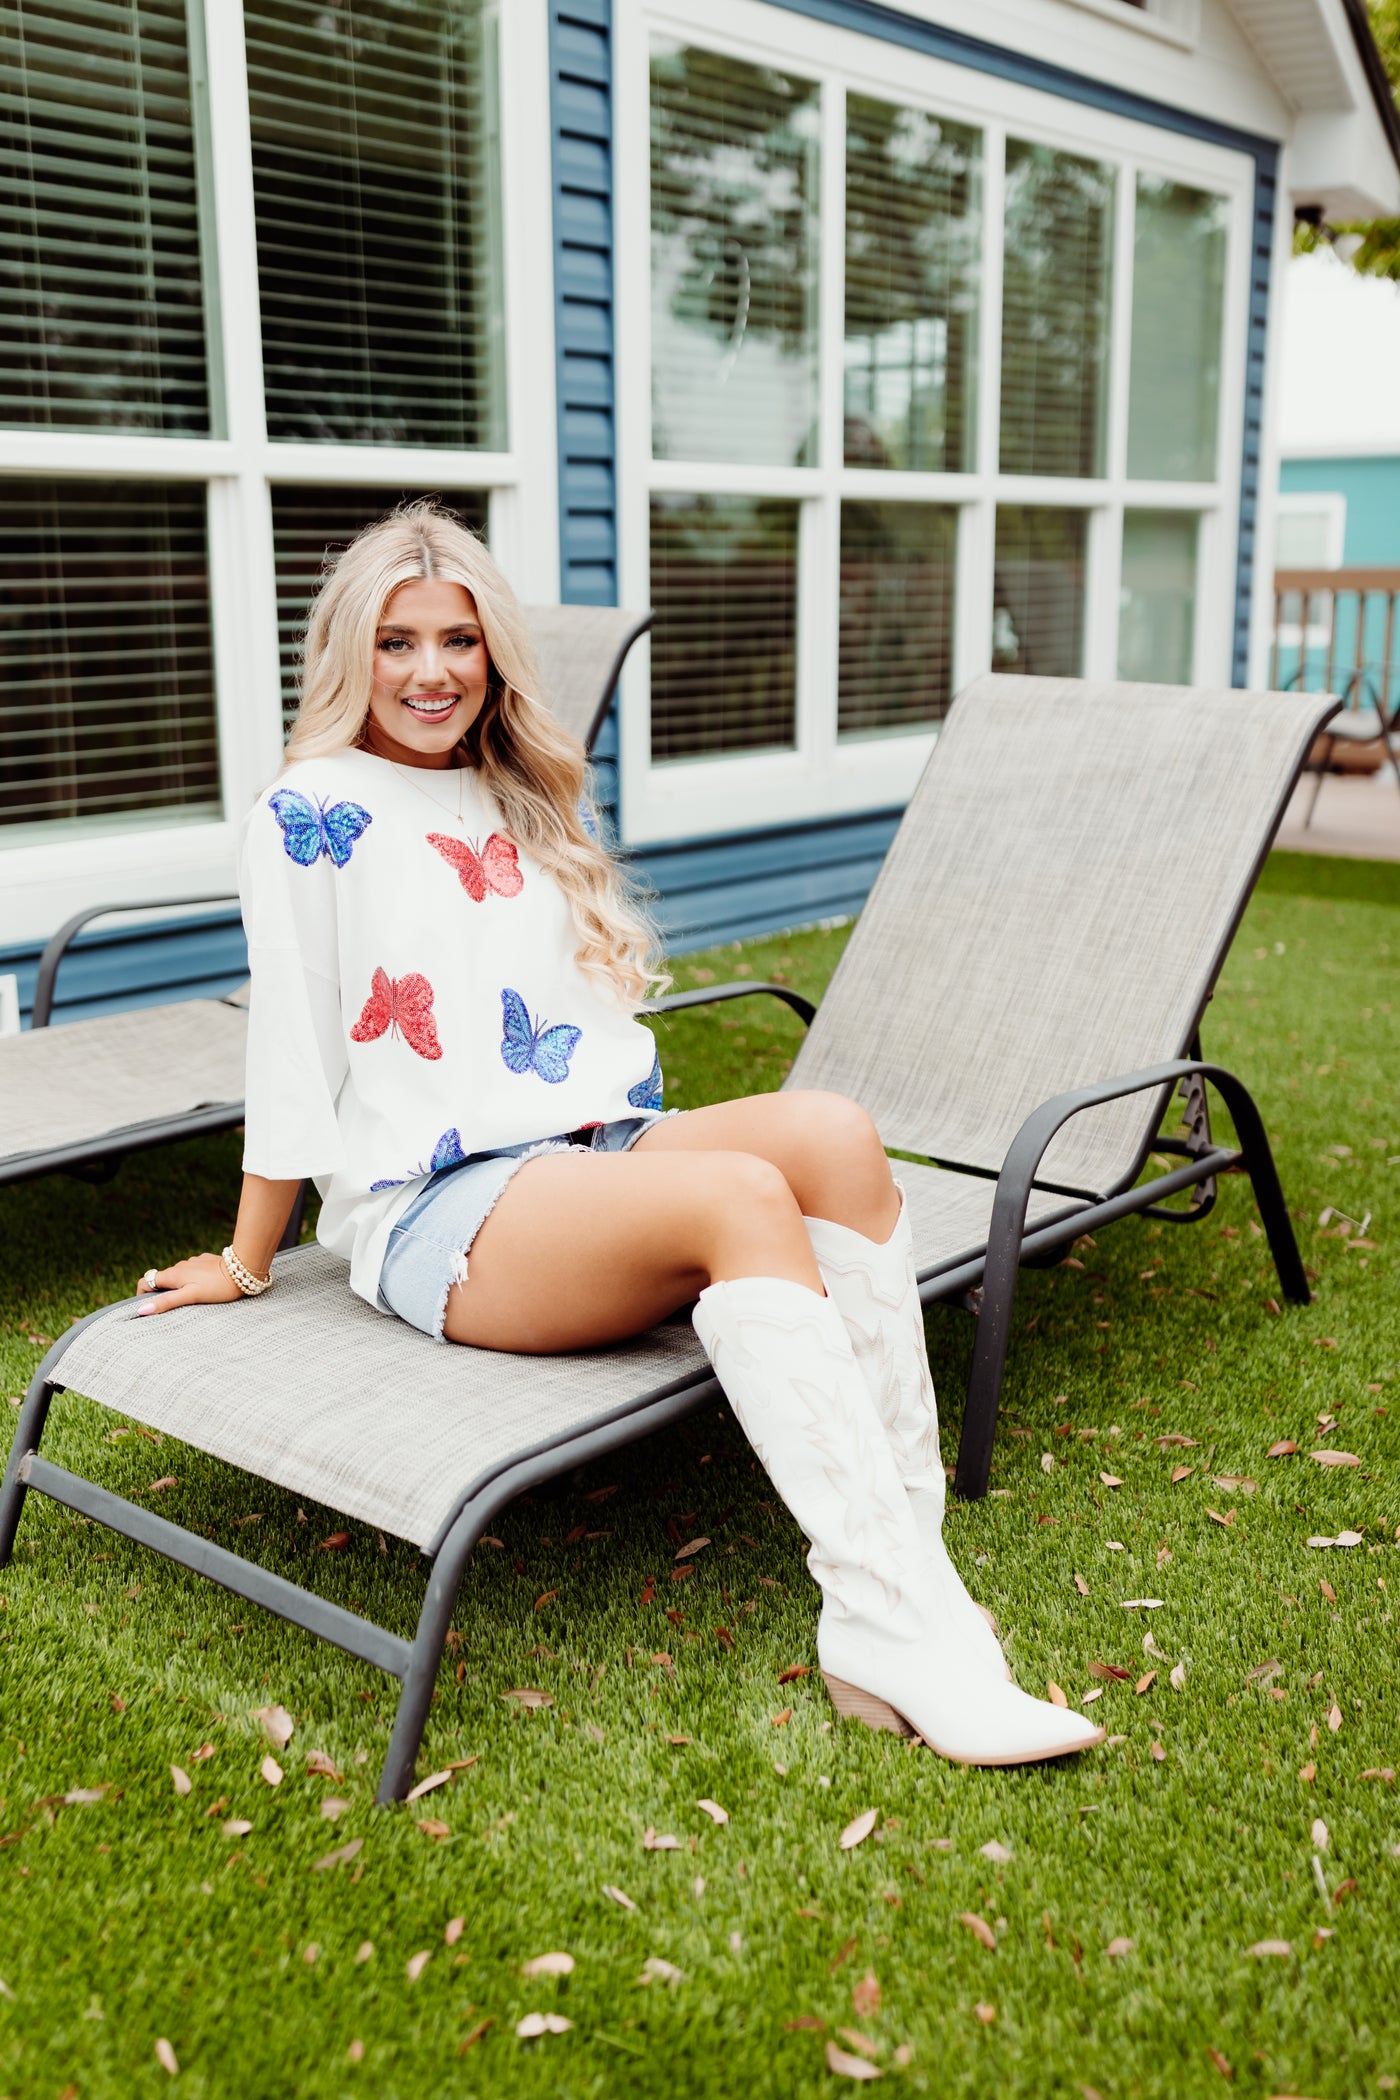 White Red and Blue Butterfly Oversized Tee